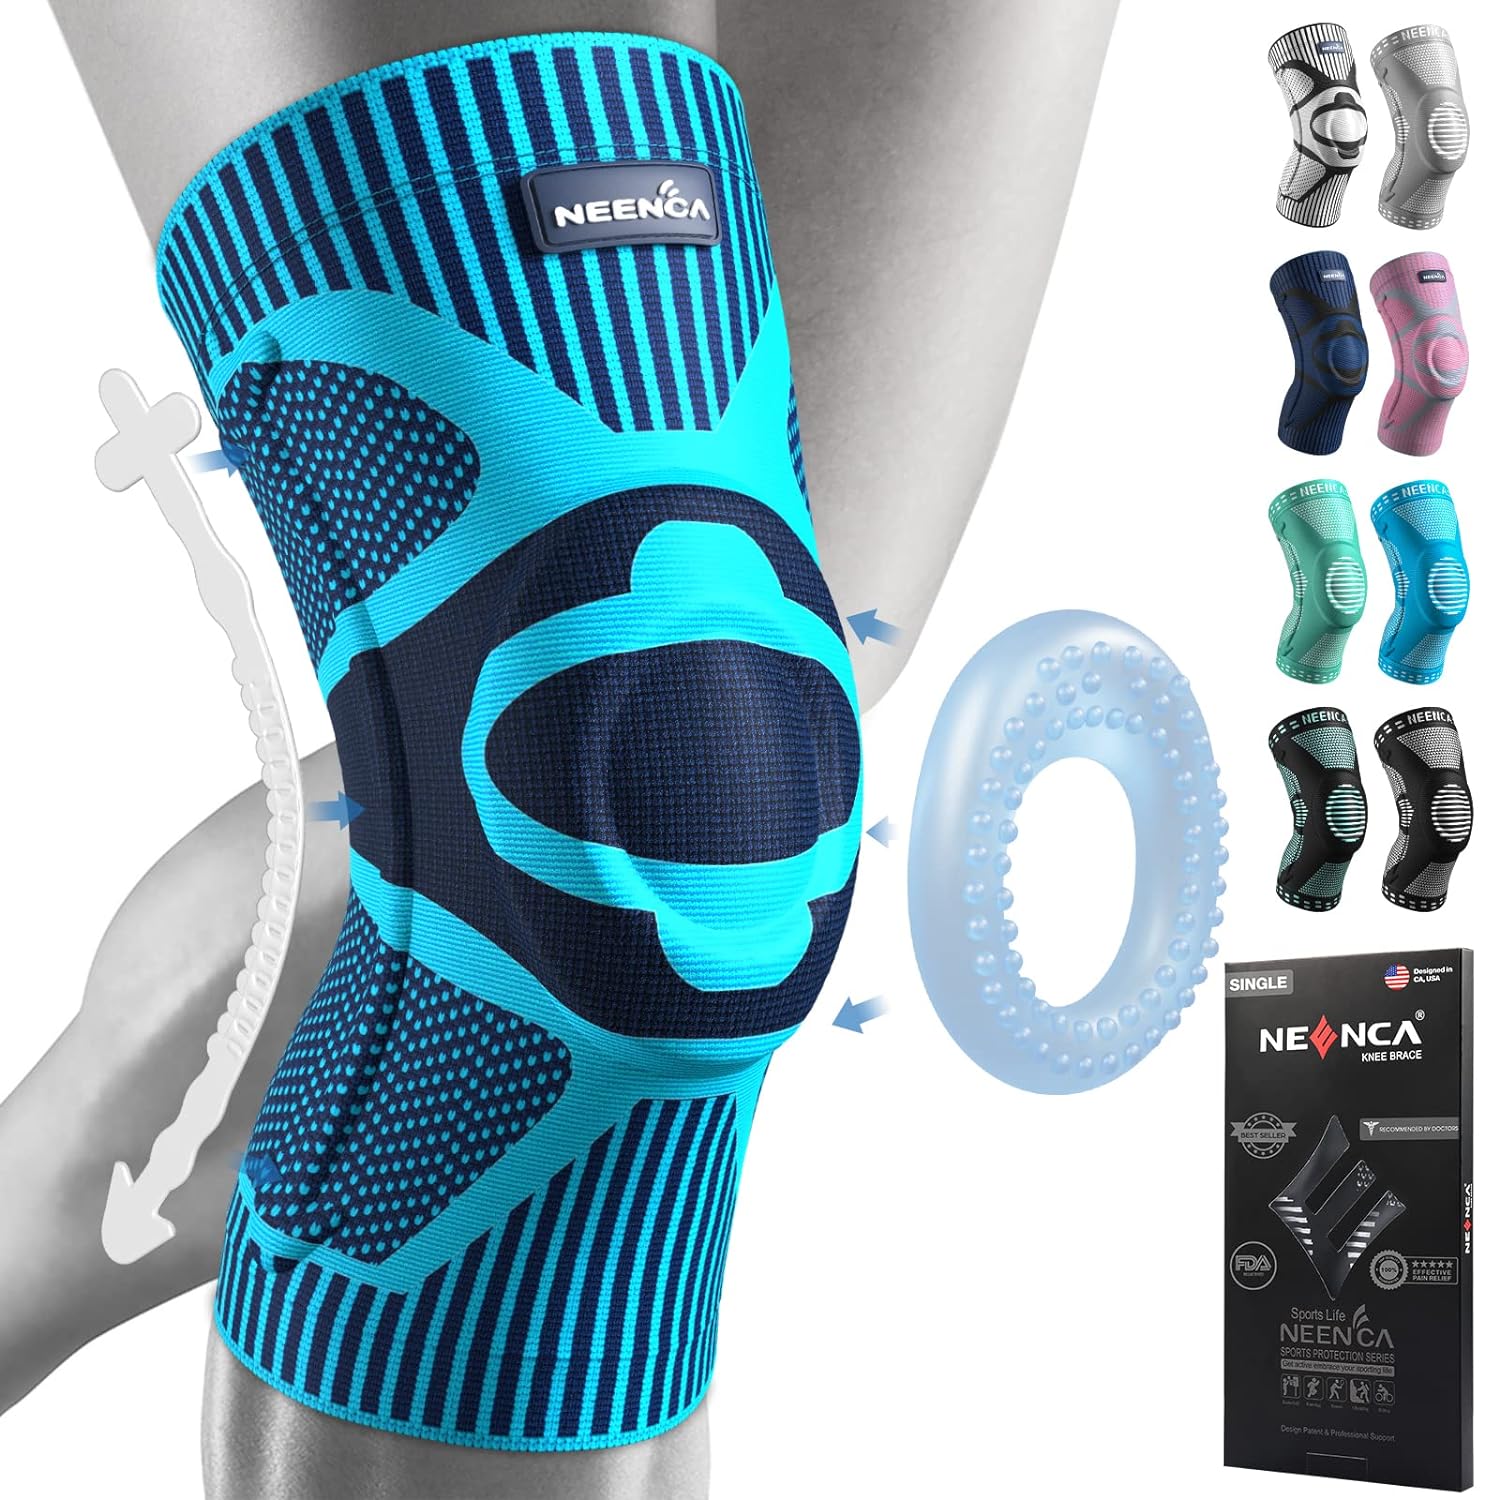 NEENCA Knee Braces for Knee Pain Relief, Compression Knee Sleeves with Patella Gel Pad Side Stabilizers, Knee Support for Weightlifting, Running, Workout, Arthritis, Meniscus Tear, Men Women. ACE-53